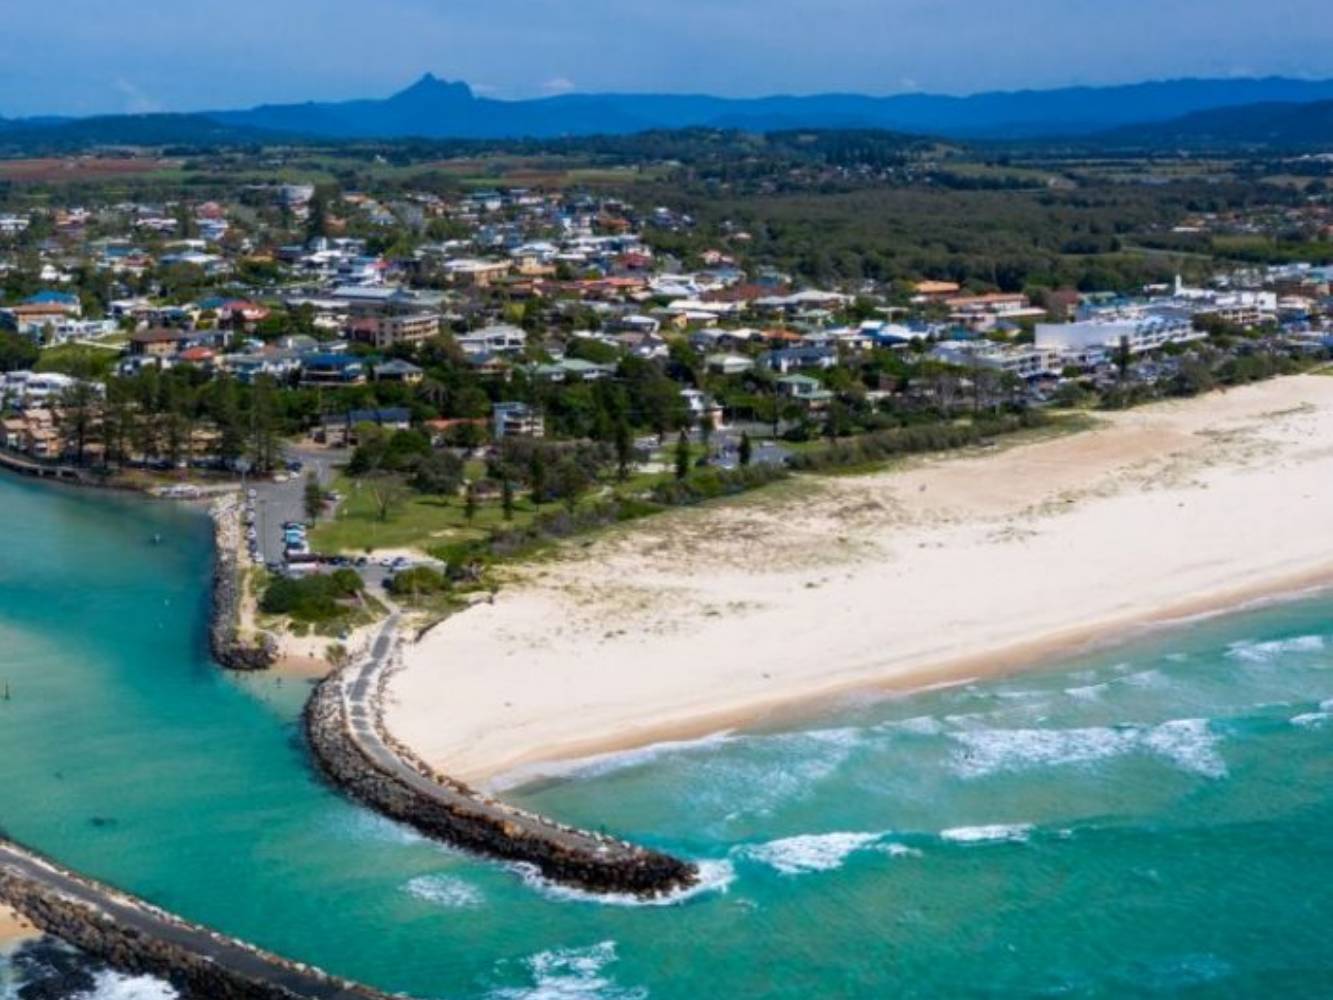 Kingscliff Beach and main part of town.